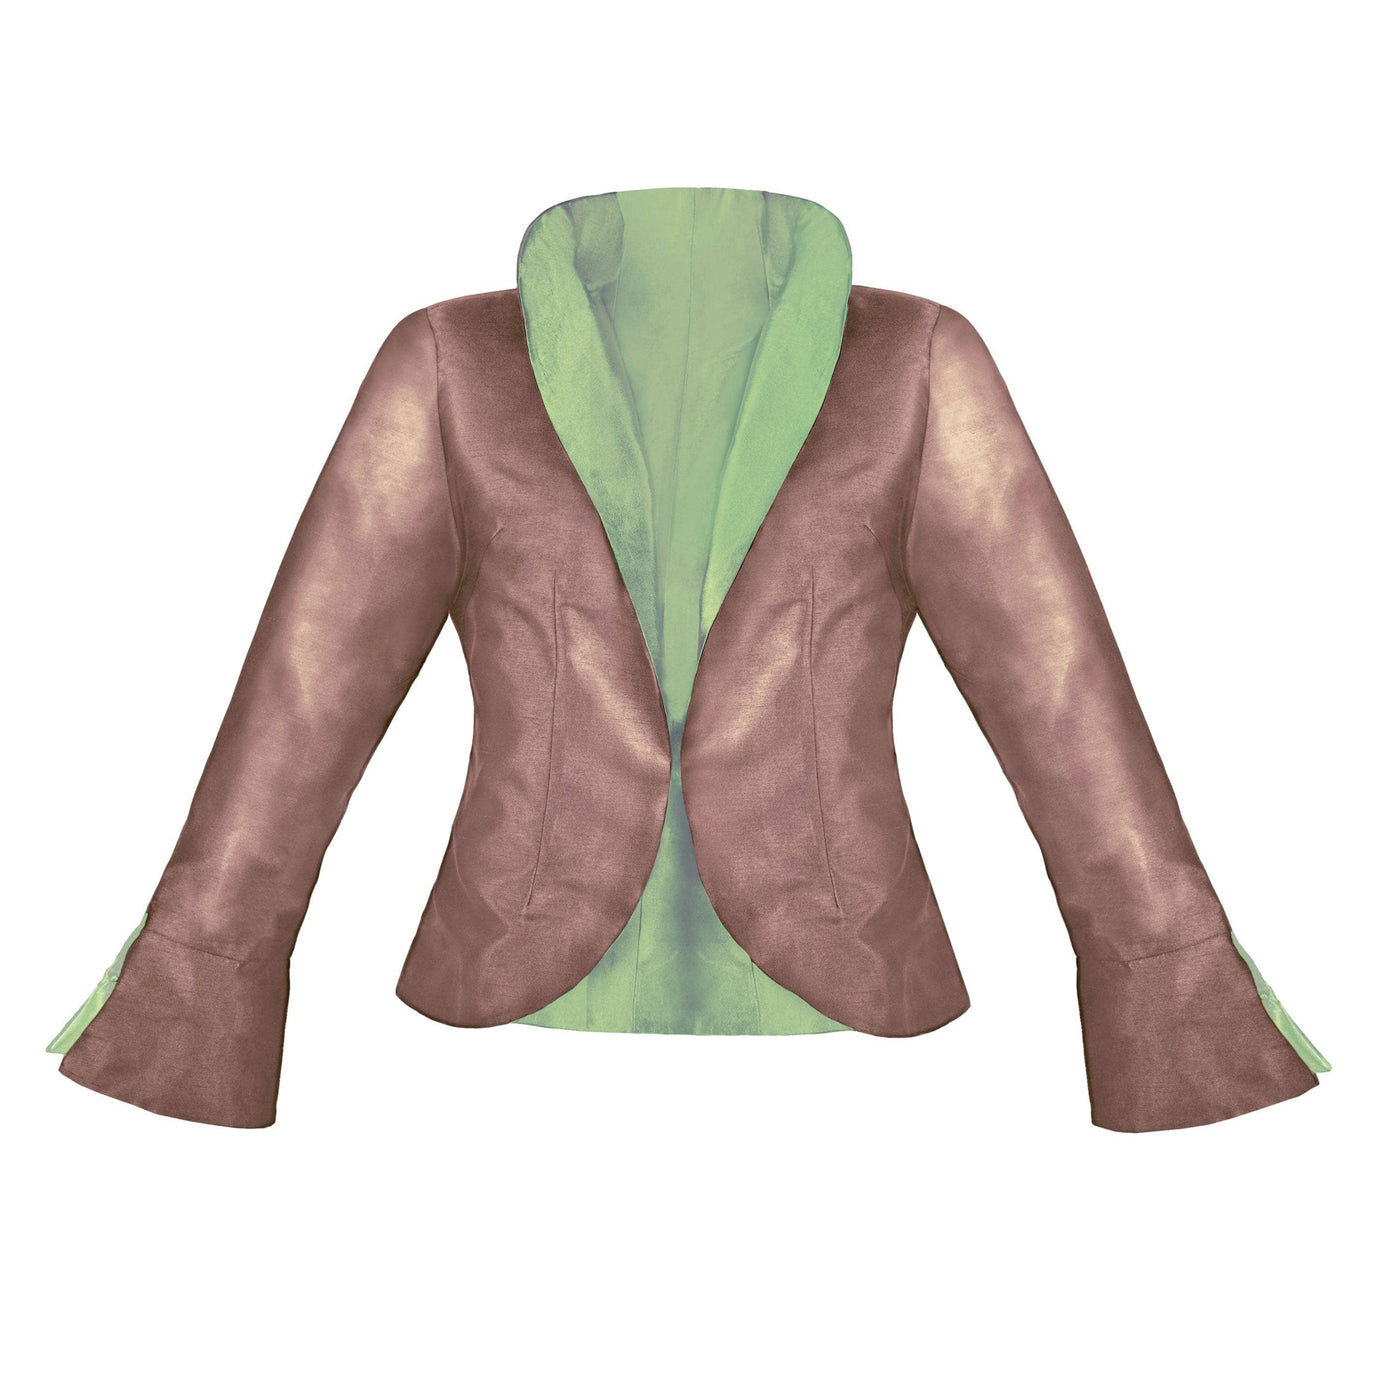 Heidi Daus® "Luxe Be A Lady" Signature Reversible Blazer